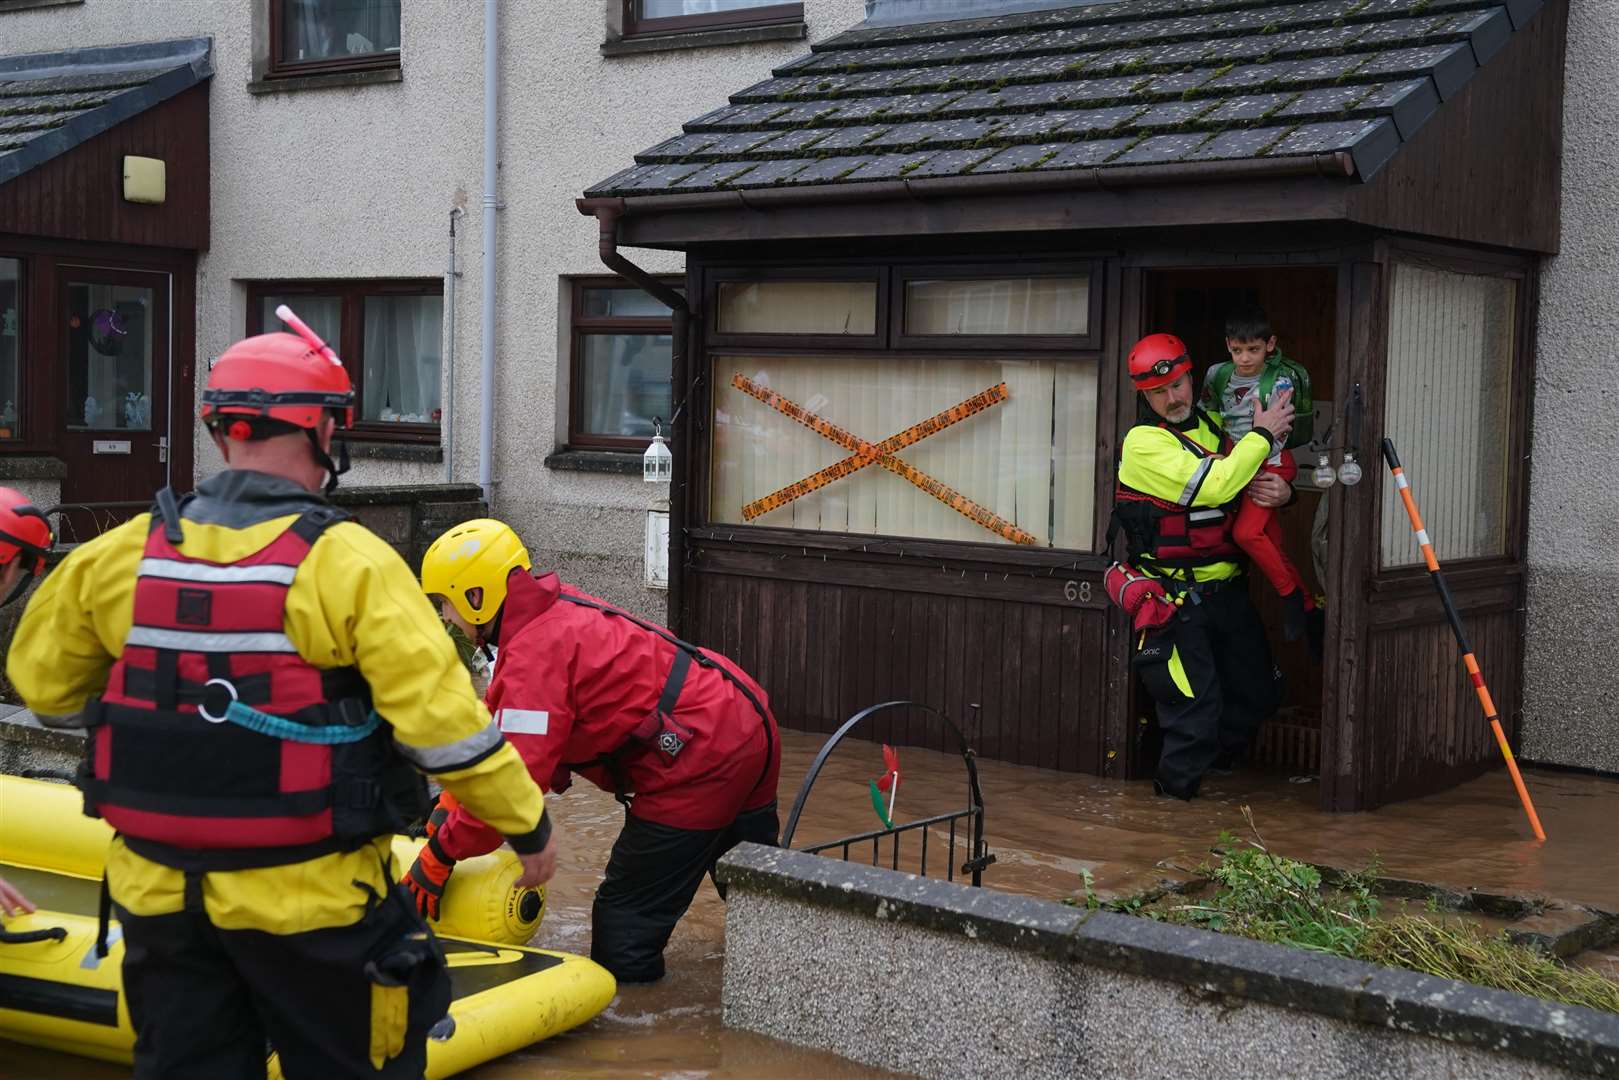 A boy was carried from a house in Brechin, Angus, as Storm Babet batters the country. (Andrew Milligan/PA)